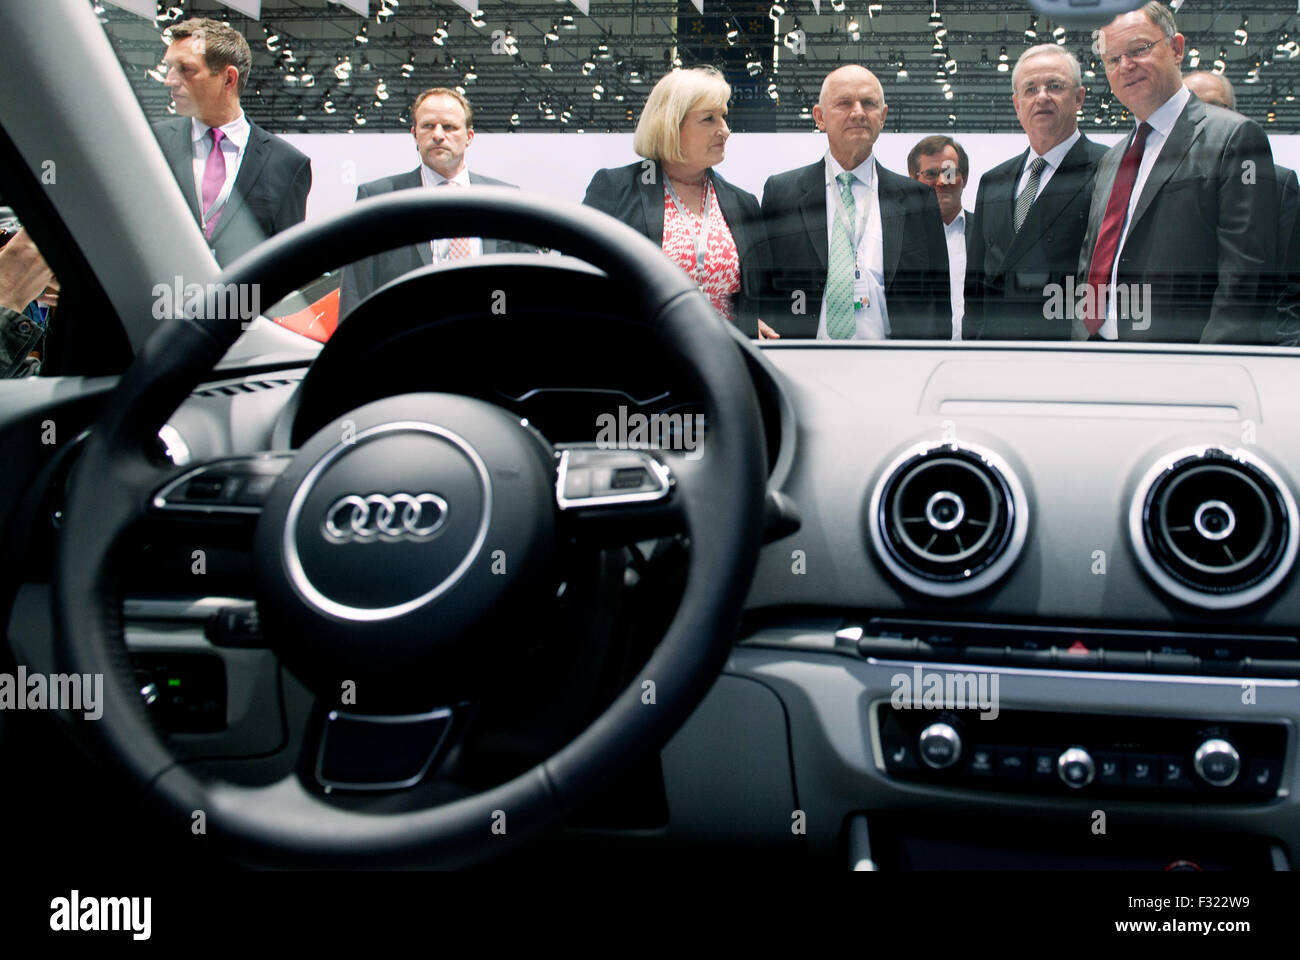 Lower Saxony's premier Stephan Weil (R-L), Volkswagen (VW) chairman of the management board, Martin Winterkorn, Volkswagen chairman of the supervisory board, Ferdinand Piech and his wife and supervisory board member Ursula Piech stand behind an Audi during the VW general meeting in Hanover, Germany, 25 April 2013. Photo: JULIAN STRATENSCHULTE Stock Photo